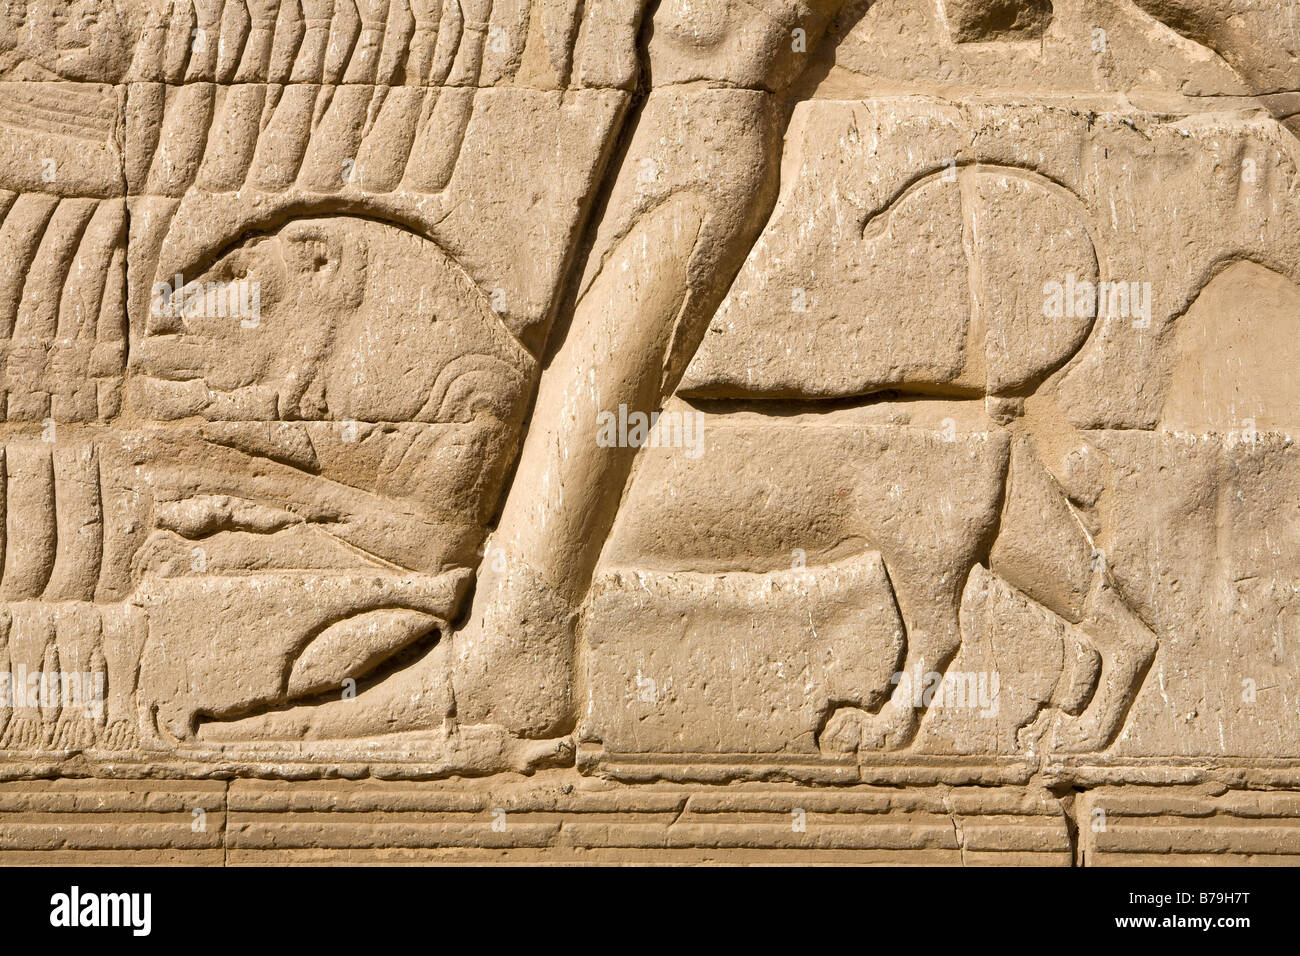 Relief work on the walls at the Temple of Khnum at Esna, Egypt Stock Photo